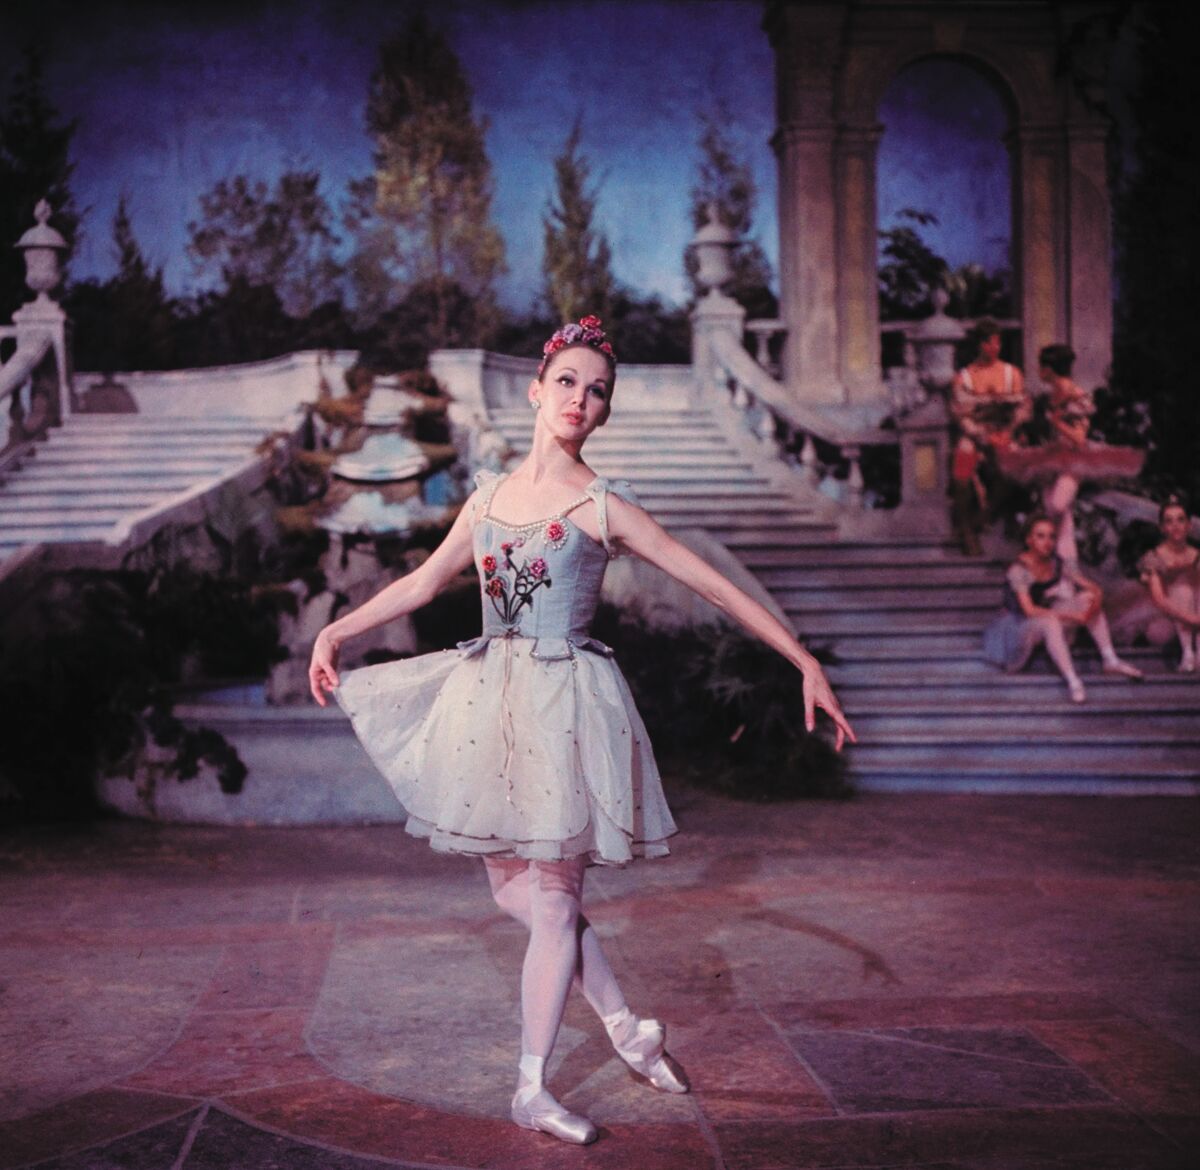 A ballerina with one hand holding her tutu skirt on stage